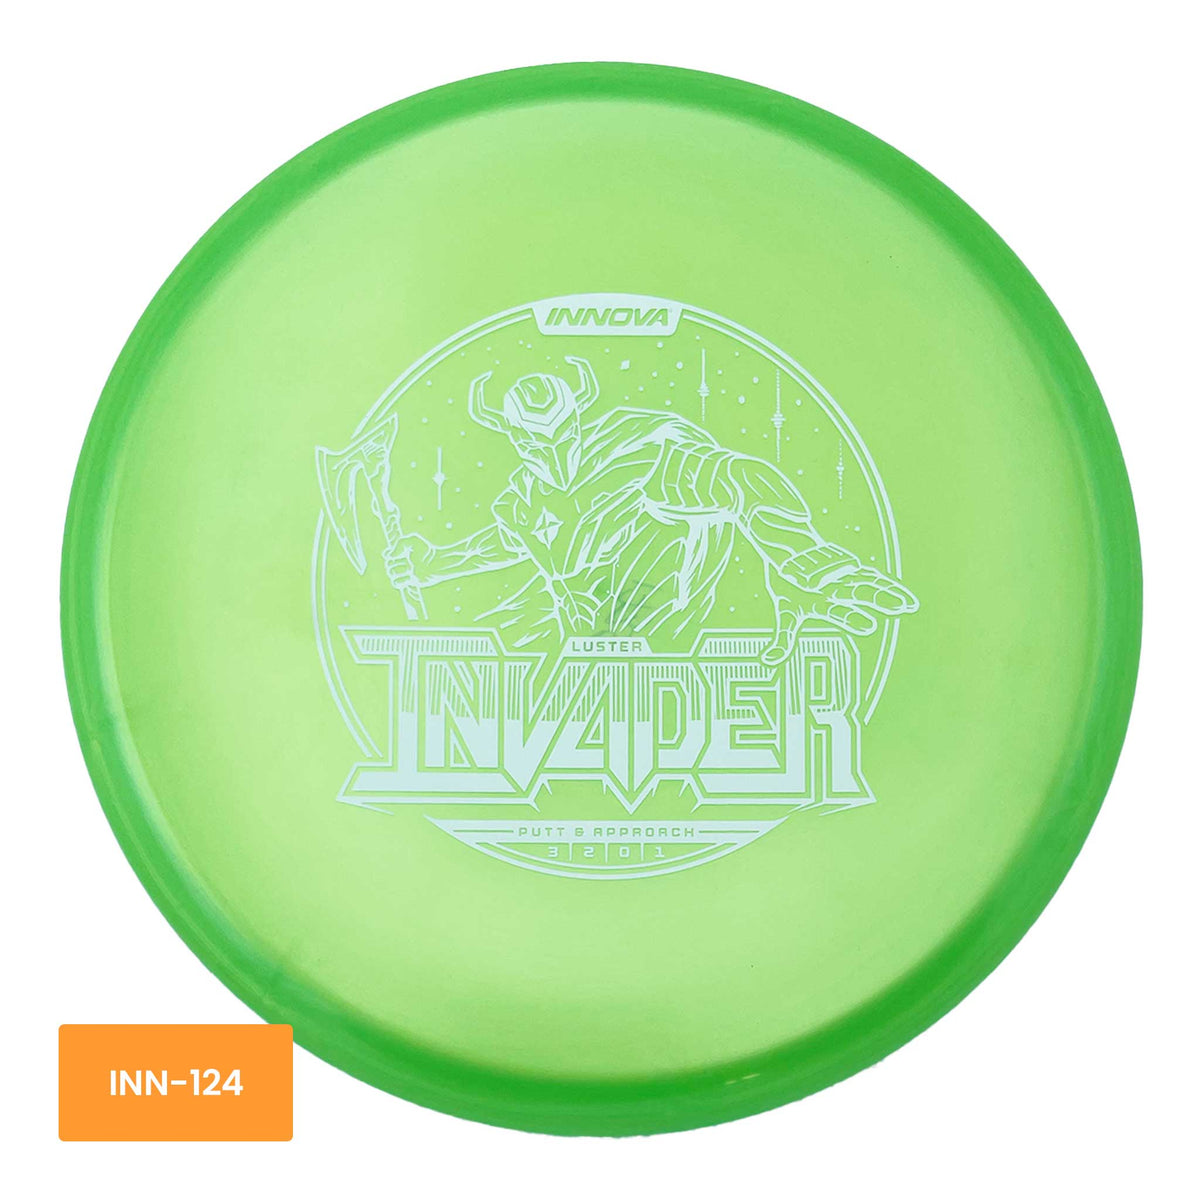 Innova Disc Golf Luster Invader putter and approach - Green